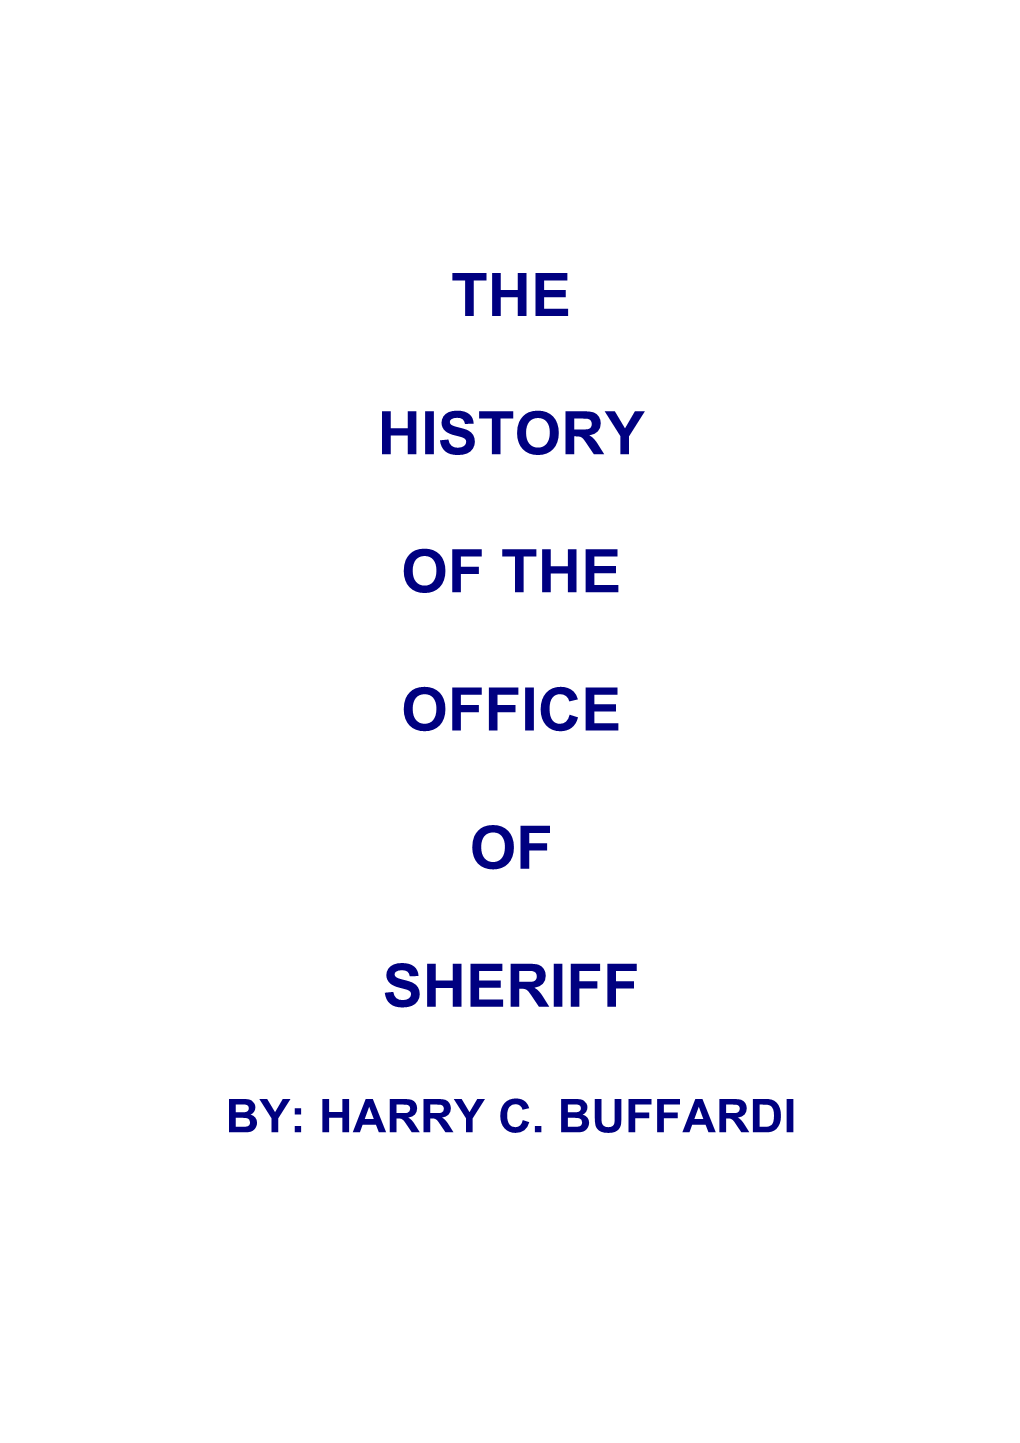 History of the Office of Sheriff